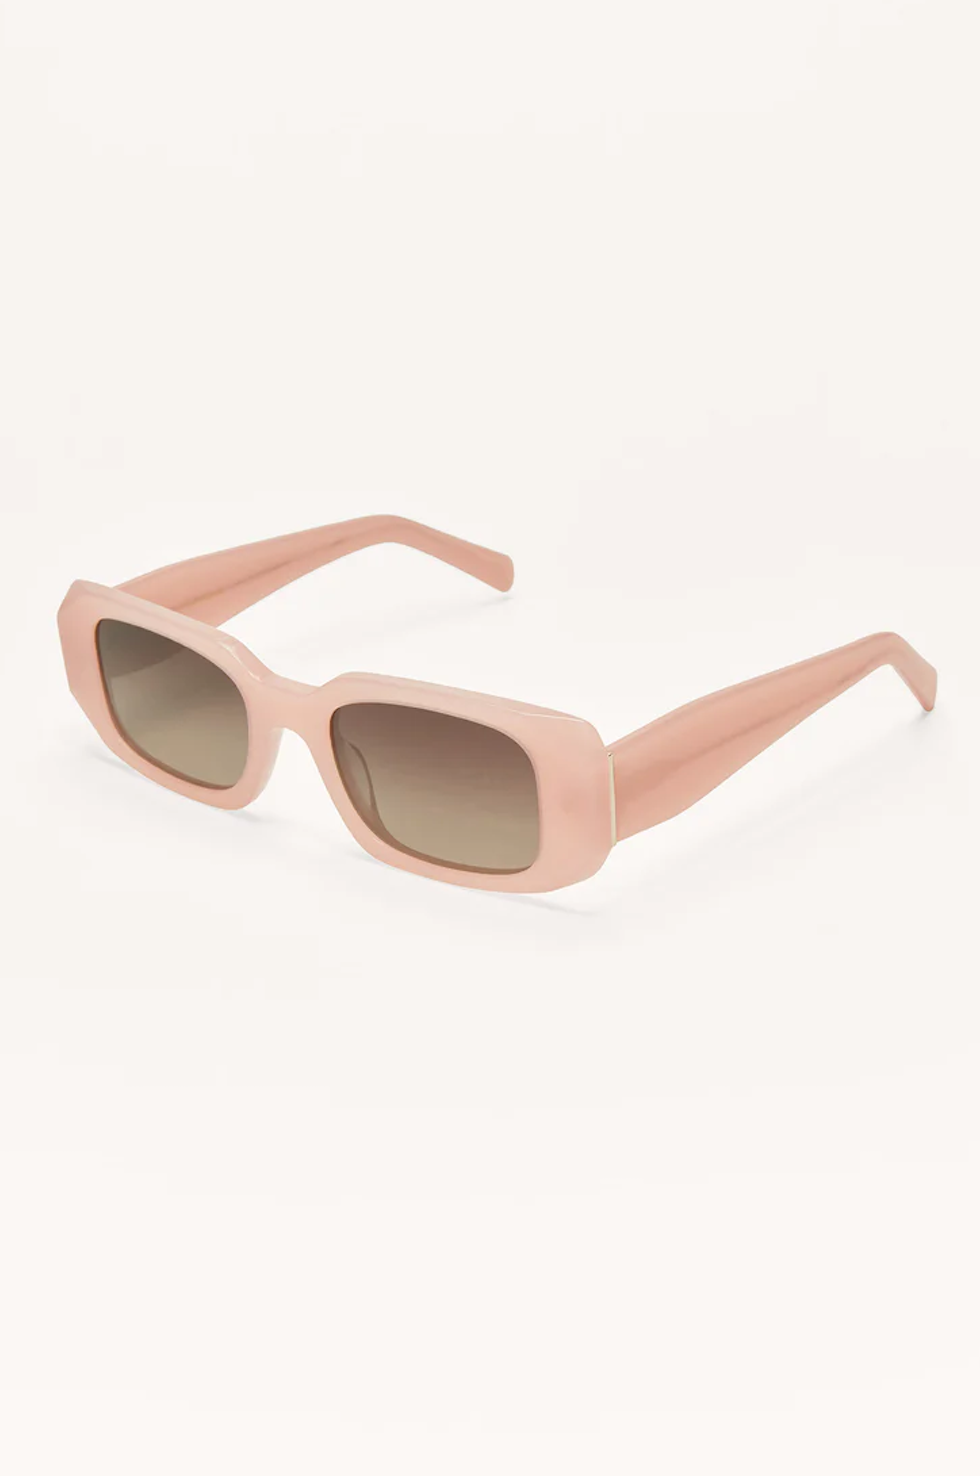 Z SUPPLY OFF DUTY SUNGLASSES IN BLUSH PINK